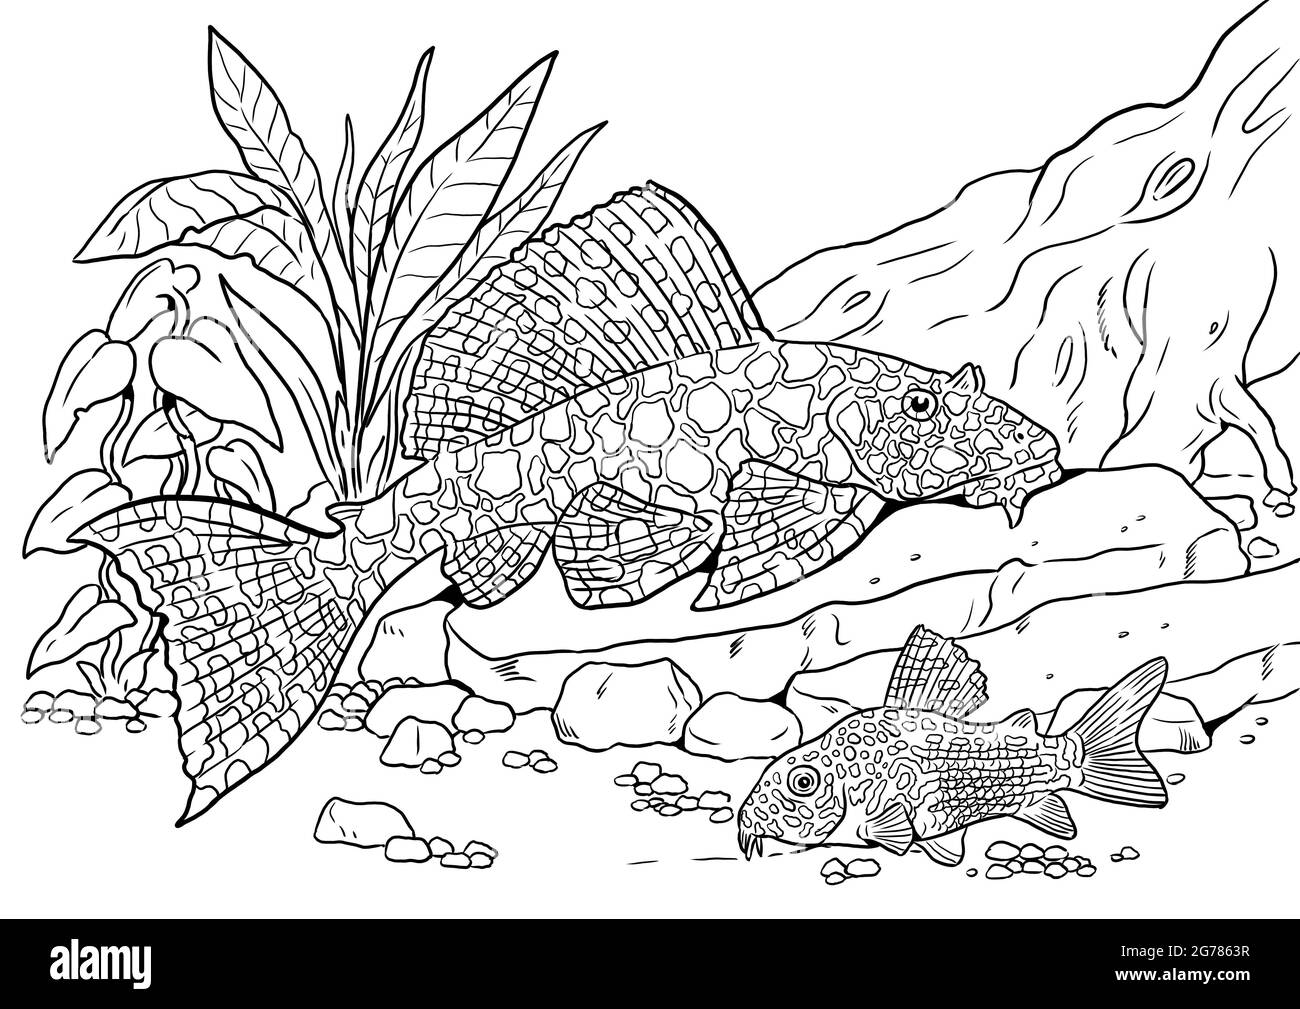 Aquarium with  ancistrus and catfish for coloring. Colorful fish templates. Coloring book for children and adults. Stock Photo